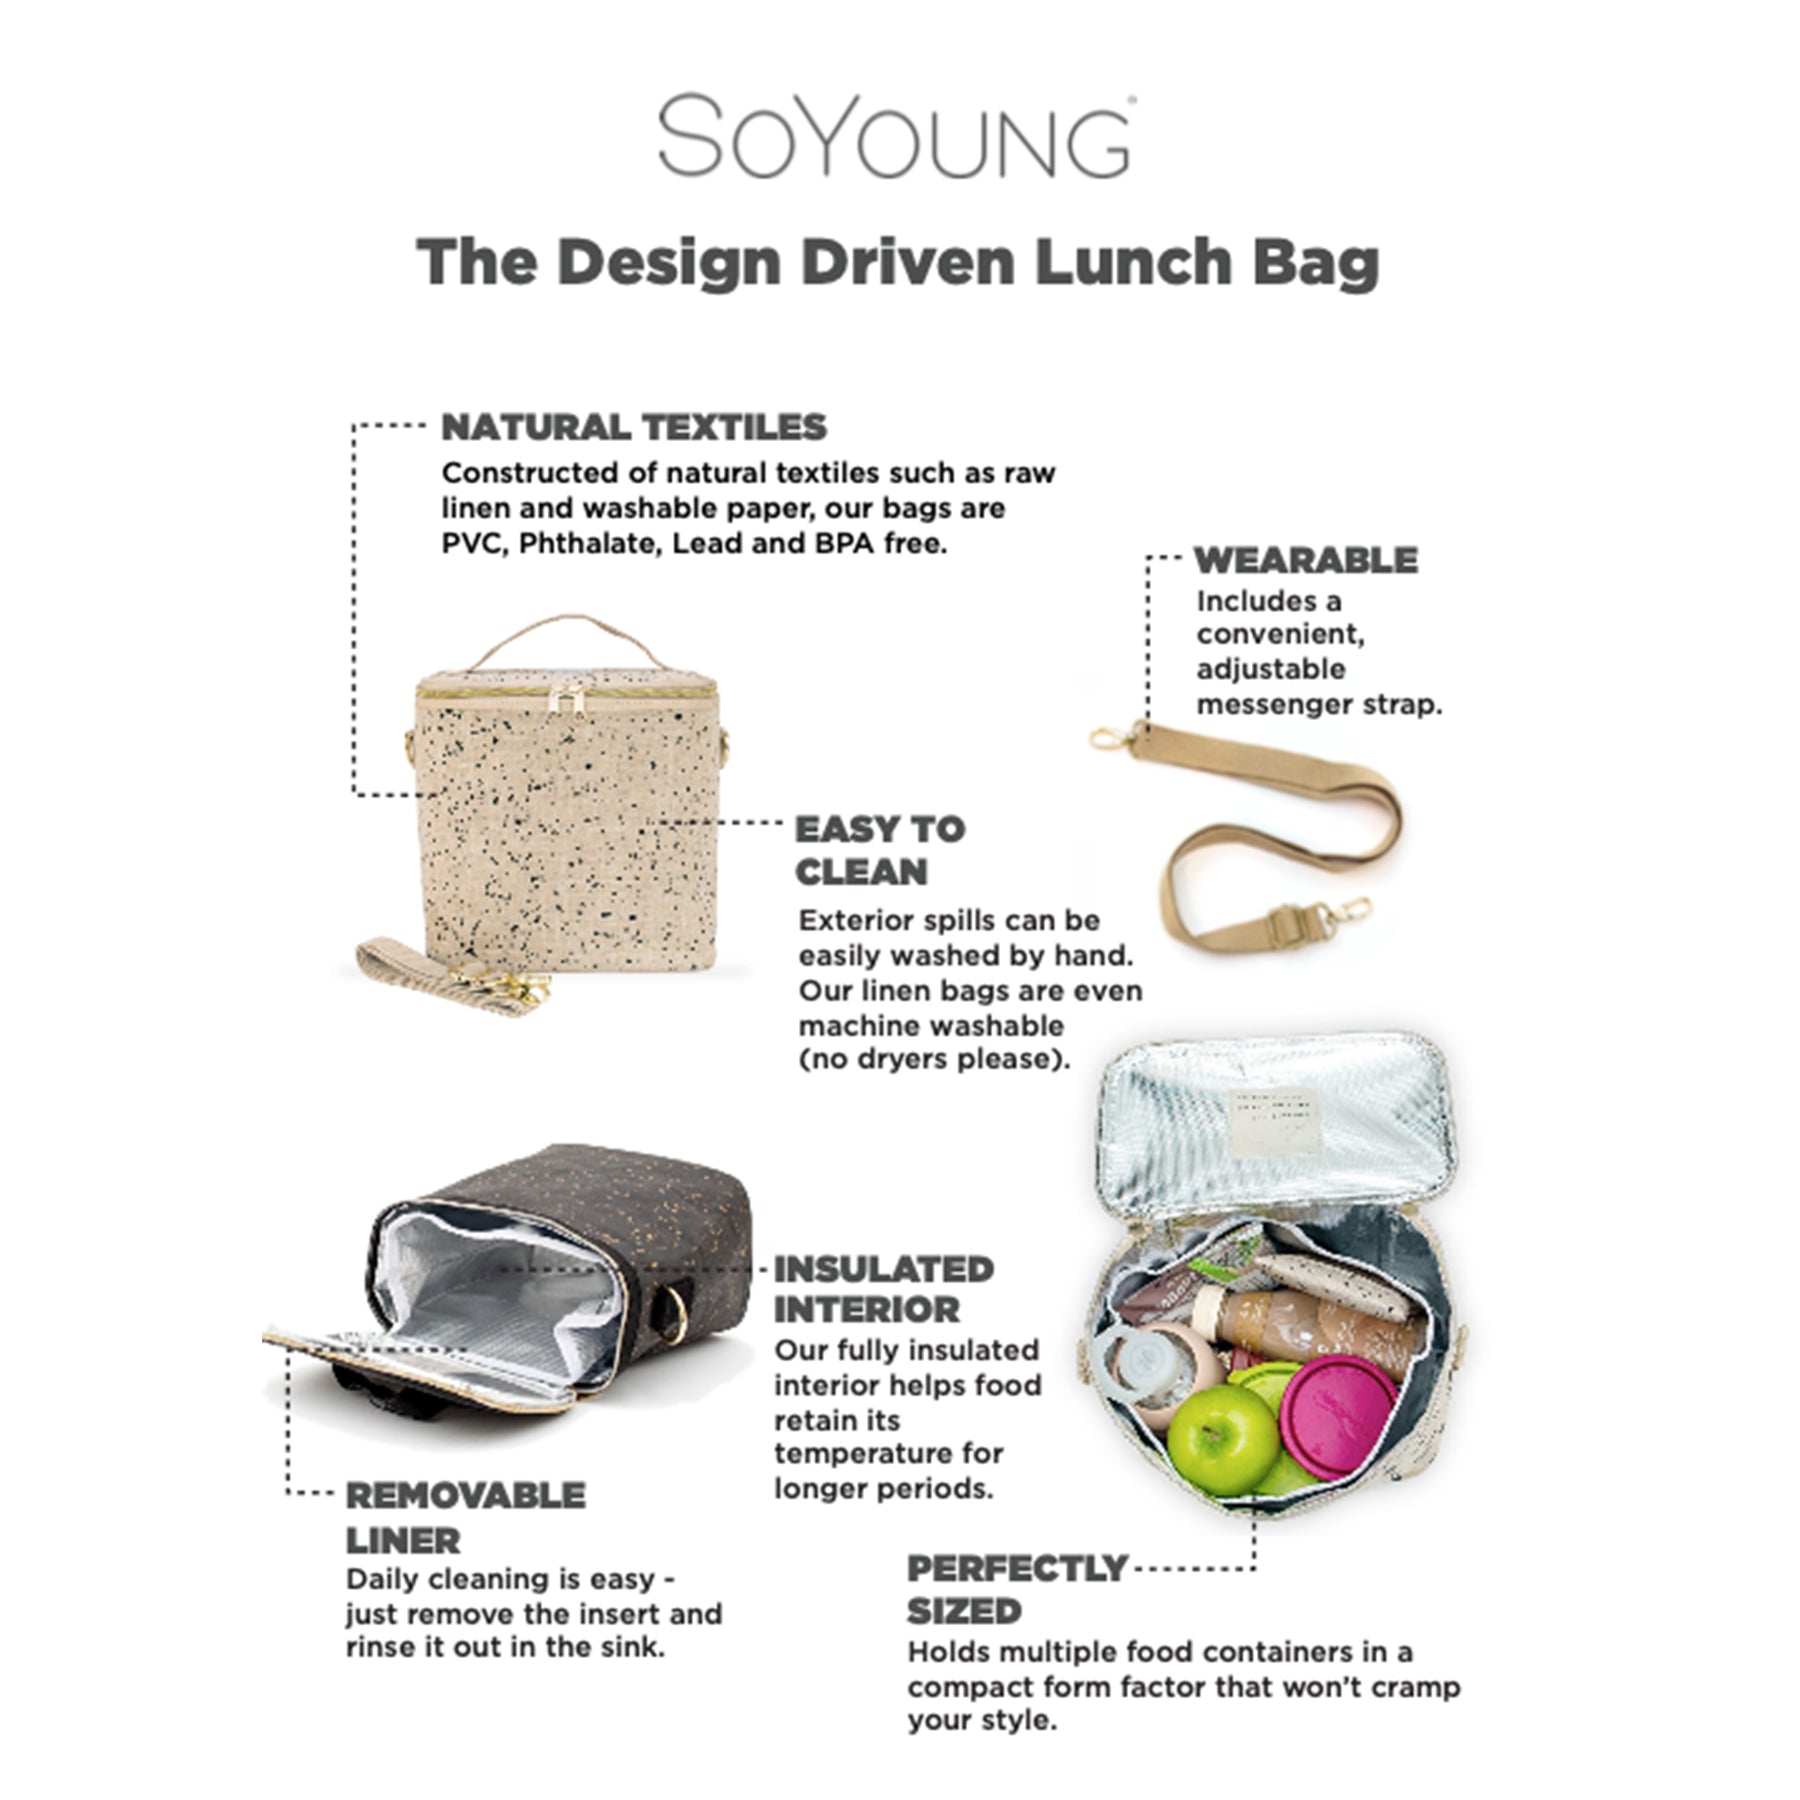 Features of the lunch bag